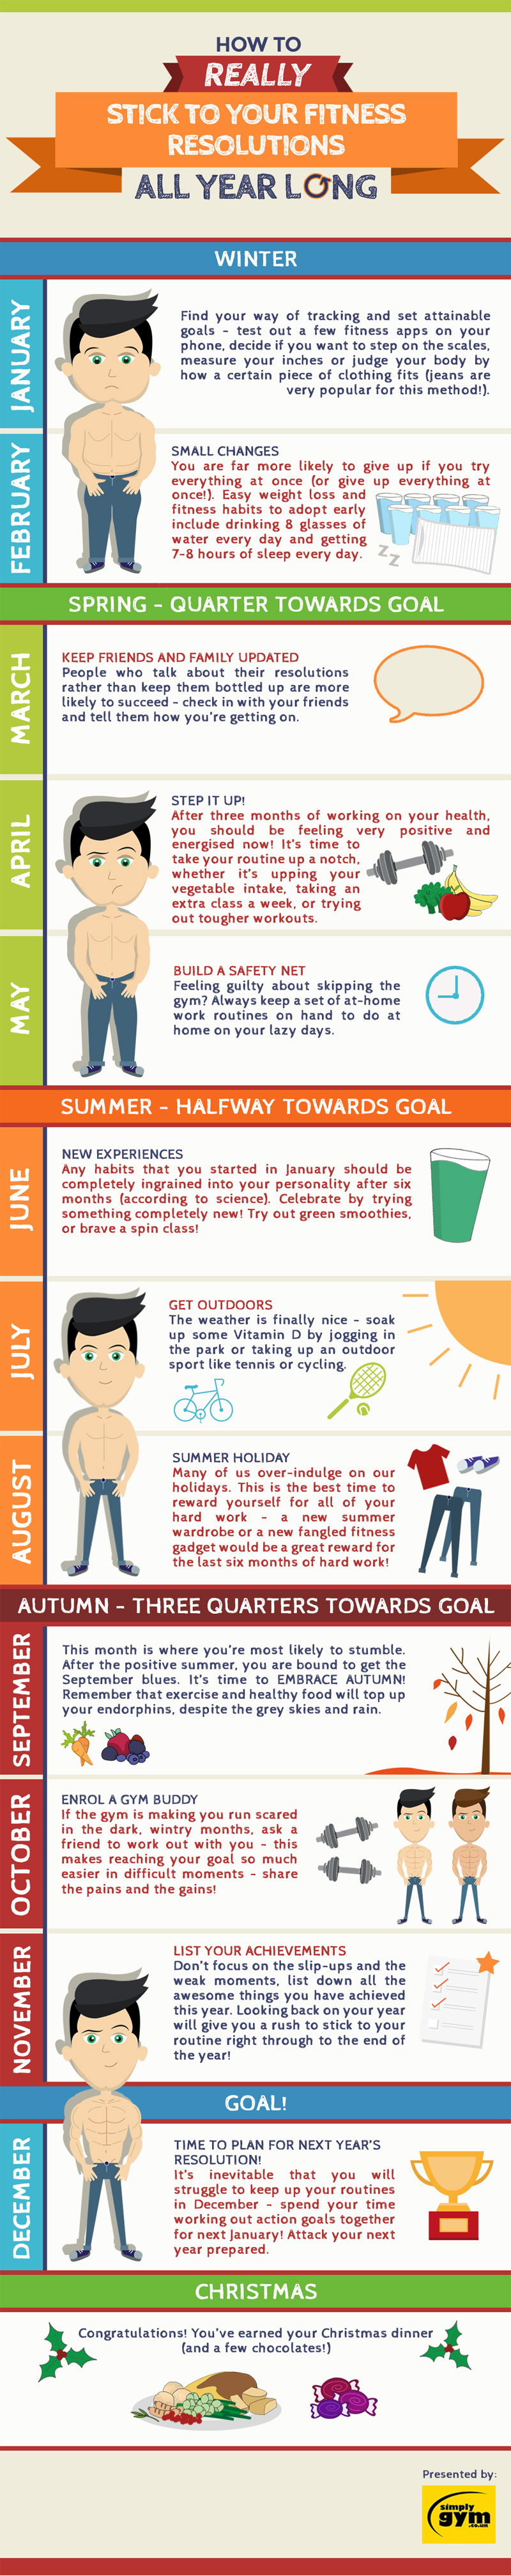 Simply Gym - Infographic - Resolutions